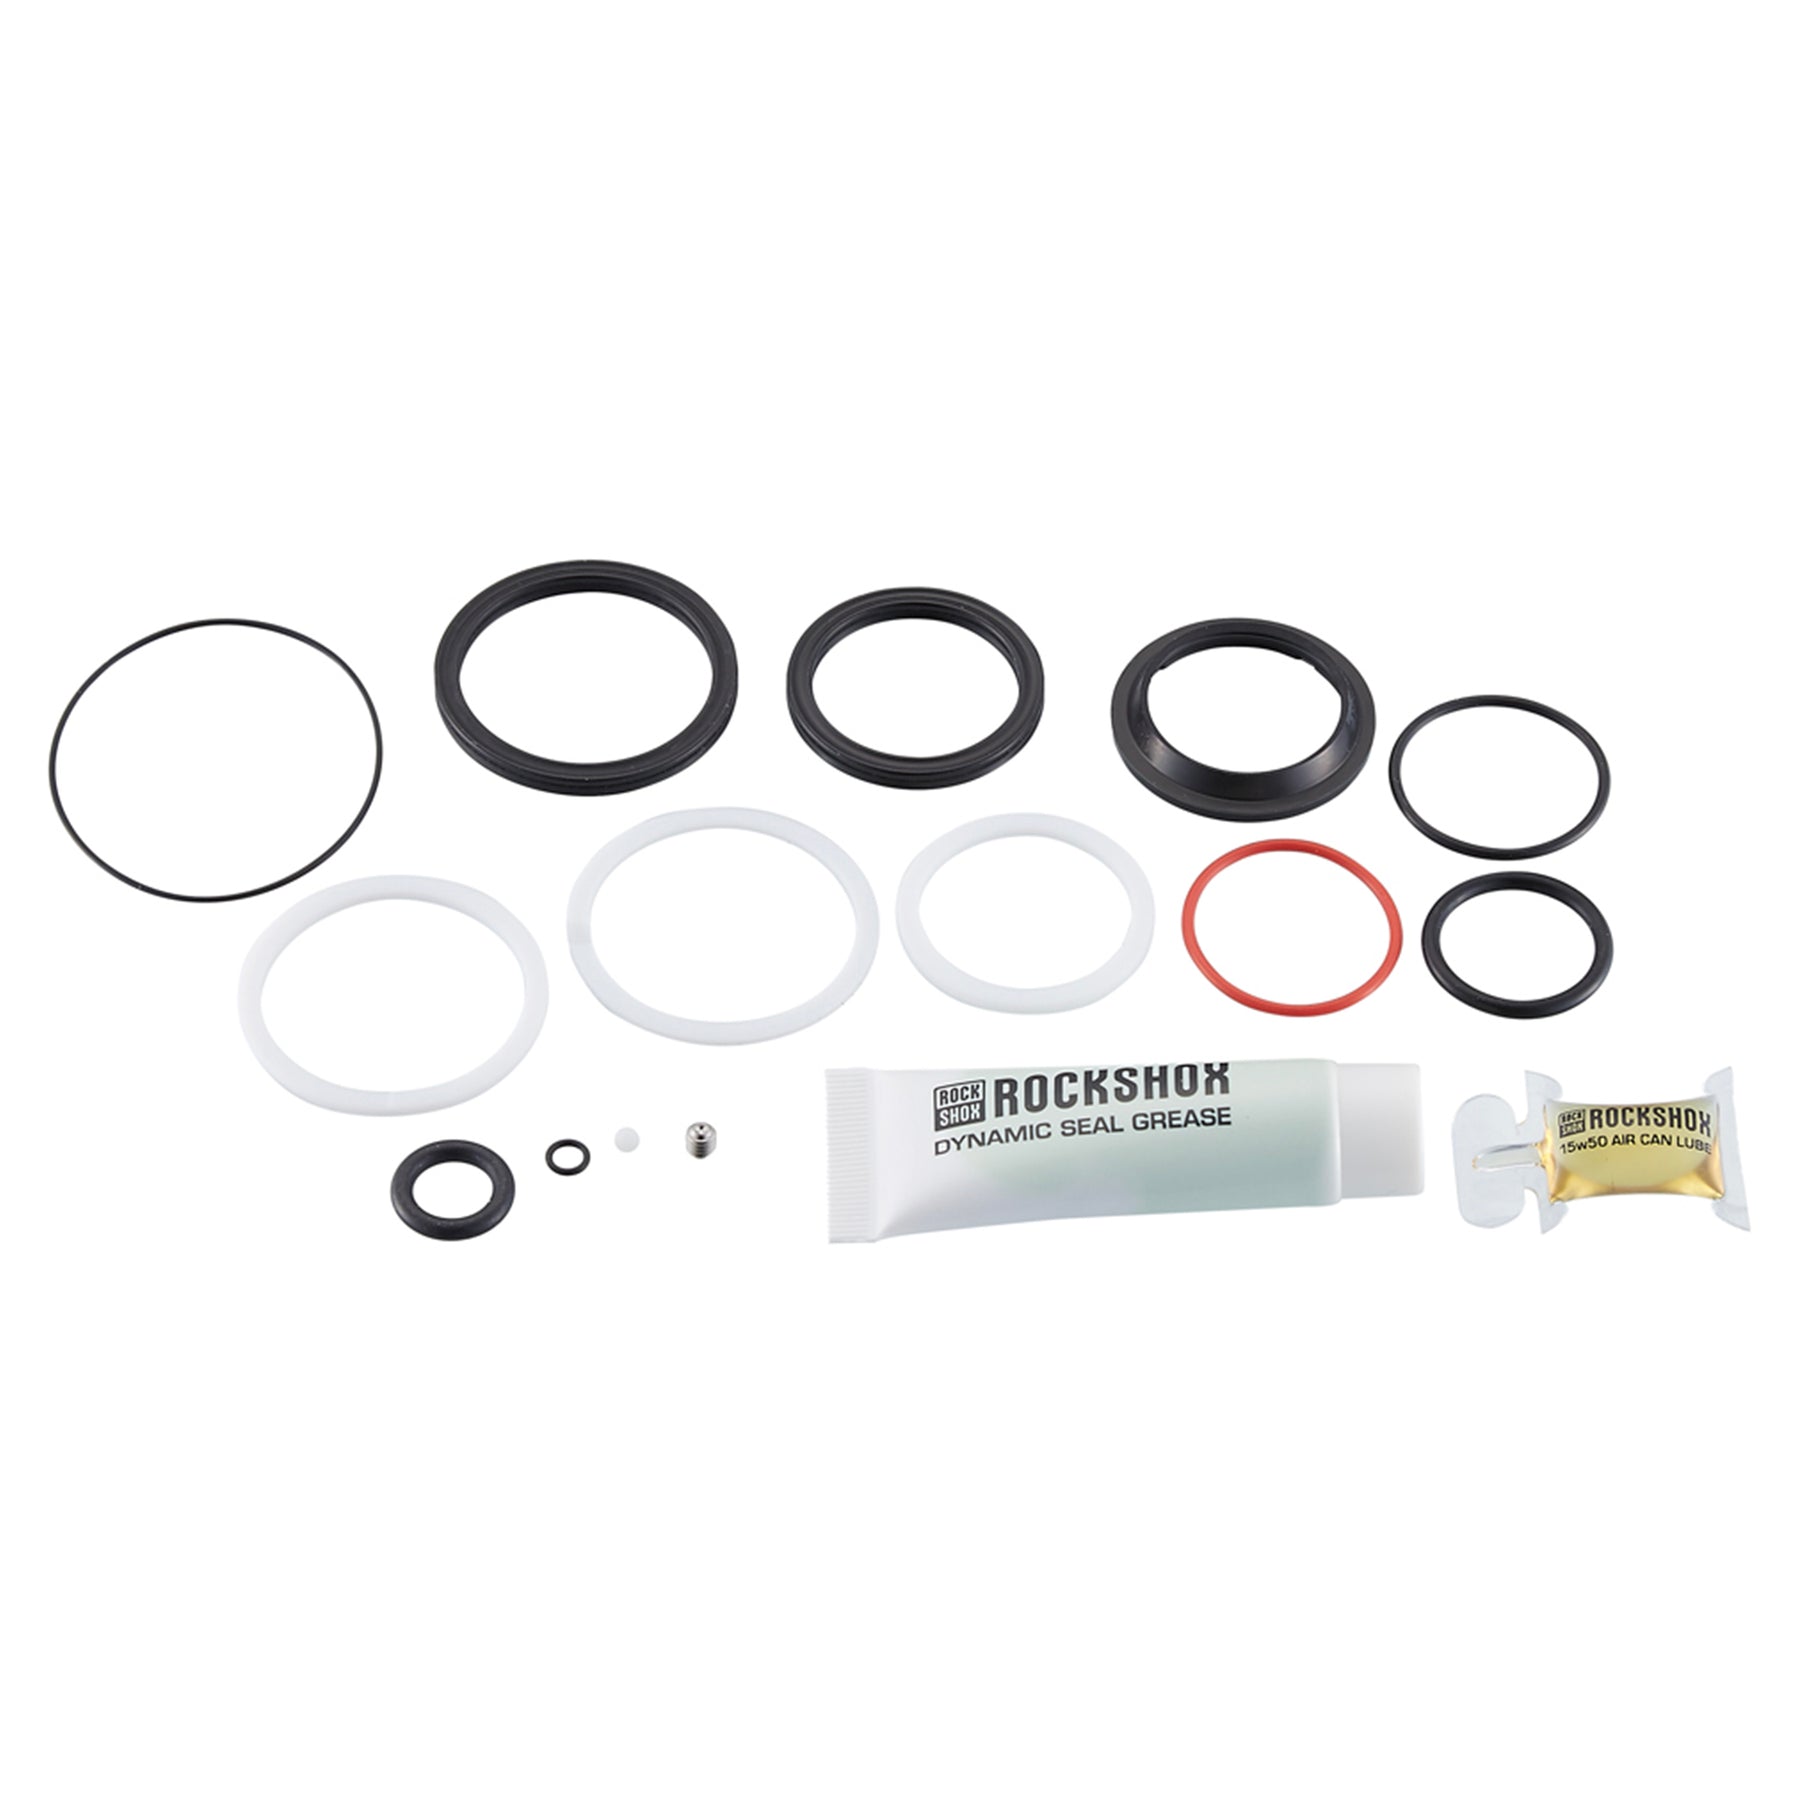 Rockshox 200 Hour/1 Year Service Kit (Includes Air Can Seals, Piston Seal, Glide Rings, Ifp Seals, Seal Grease/Oil) - Sidluxe A1 (2020)